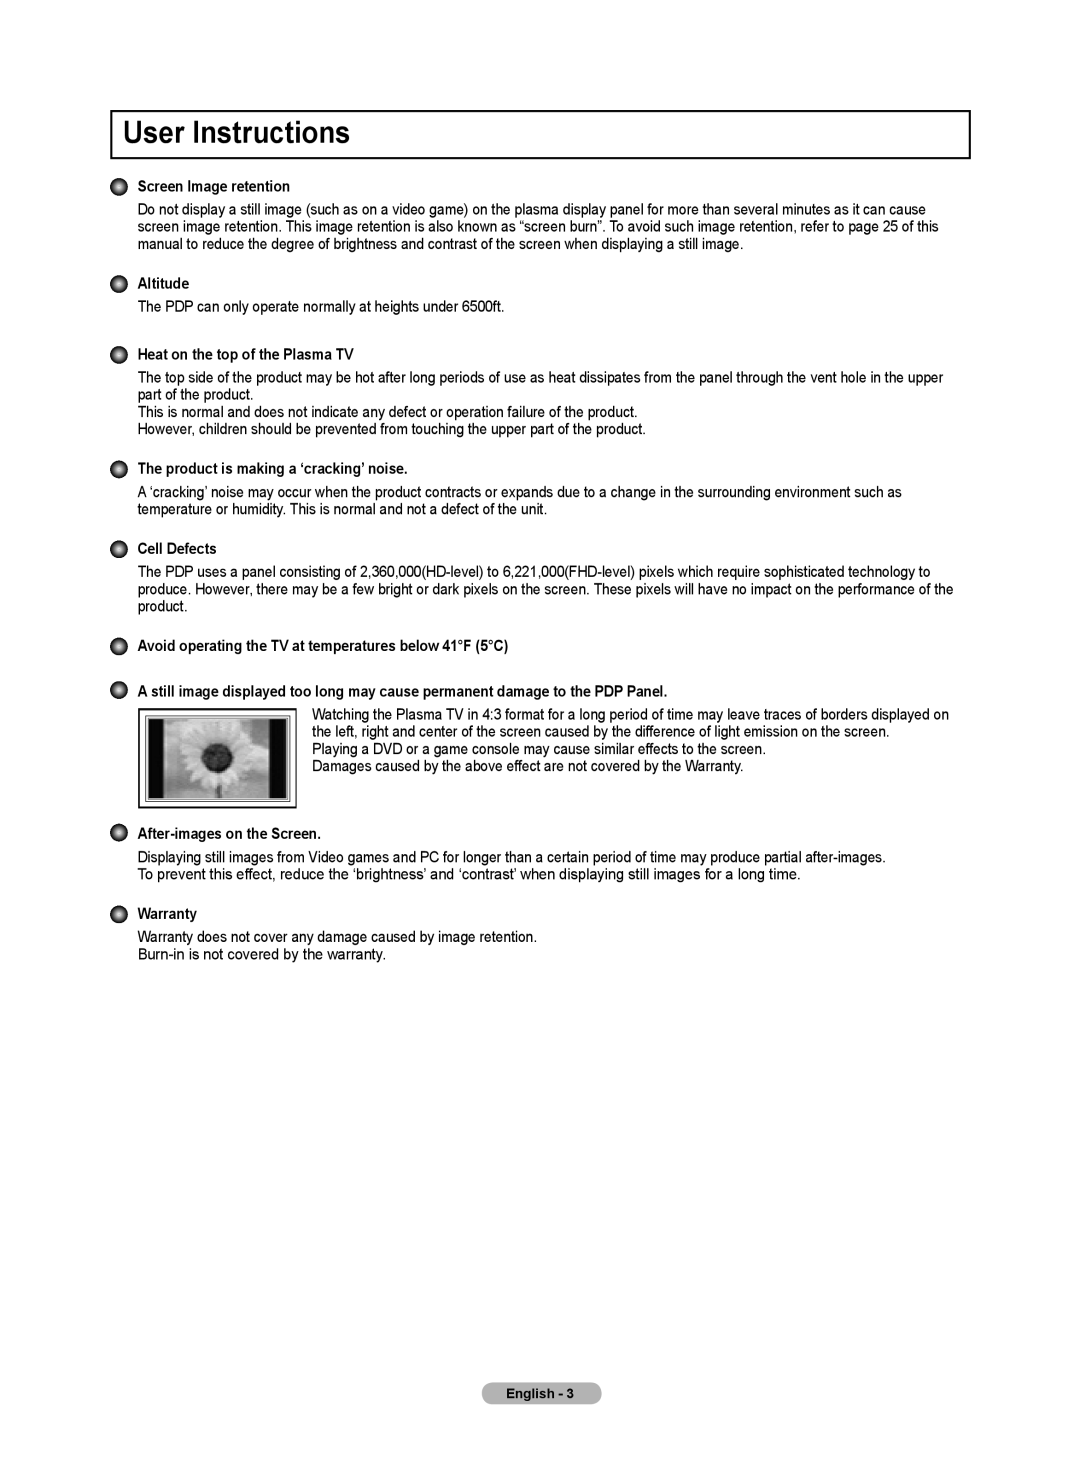 Samsung PNB590T5F User Instructions, Screen Image retention, Altitude, Heat on the top of the Plasma TV, Cell Defects 